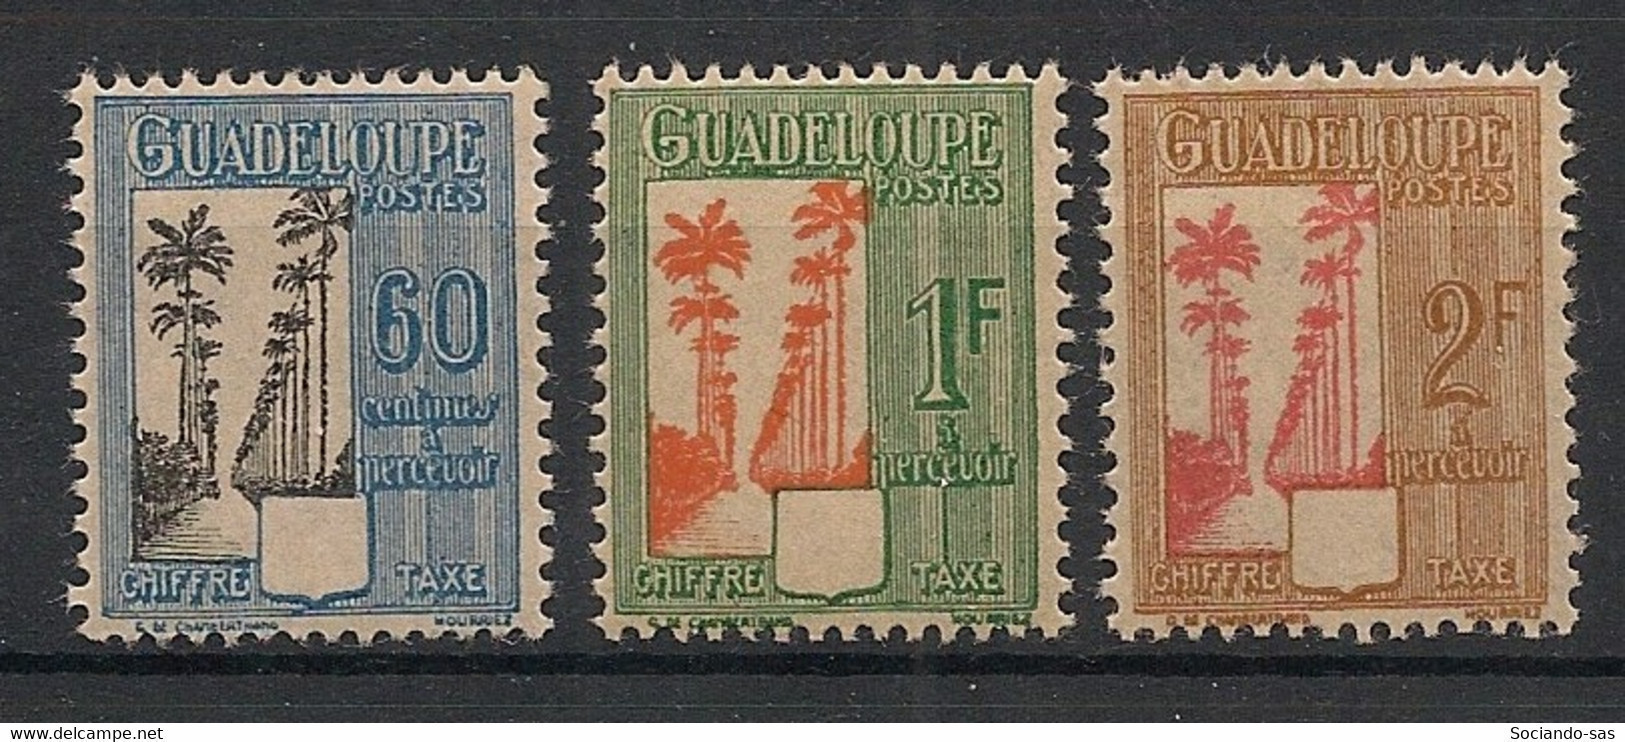 GUADELOUPE - 1944 - Taxe TT N°Yv. 38 à 40 - Série Complète - Neuf Luxe ** / MNH / Postfrisch - Postage Due